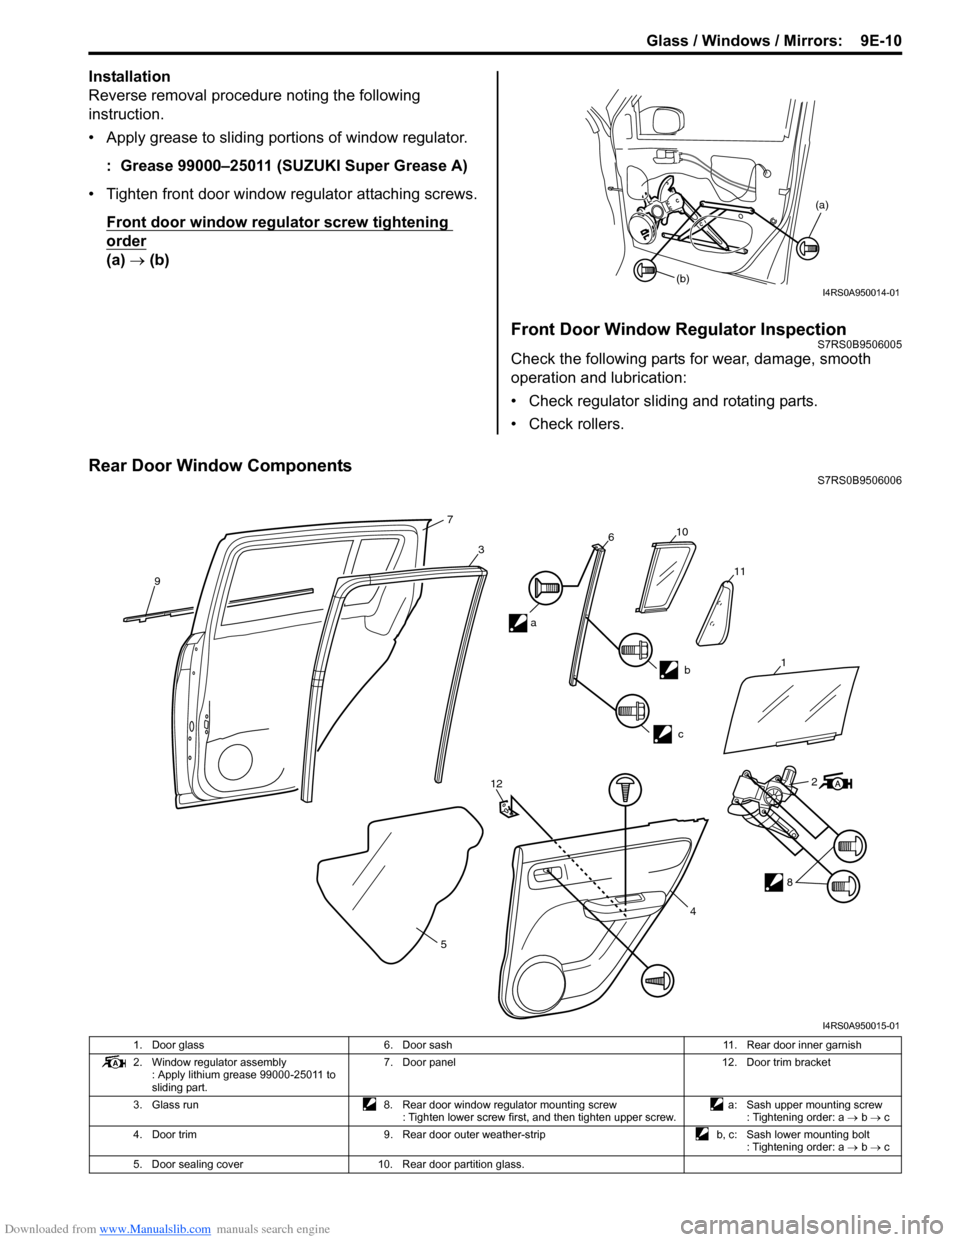 SUZUKI SWIFT 2006 2.G Service Owners Manual Downloaded from www.Manualslib.com manuals search engine Glass / Windows / Mirrors:  9E-10
Installation
Reverse removal procedure noting the following 
instruction.
• Apply grease to sliding portion